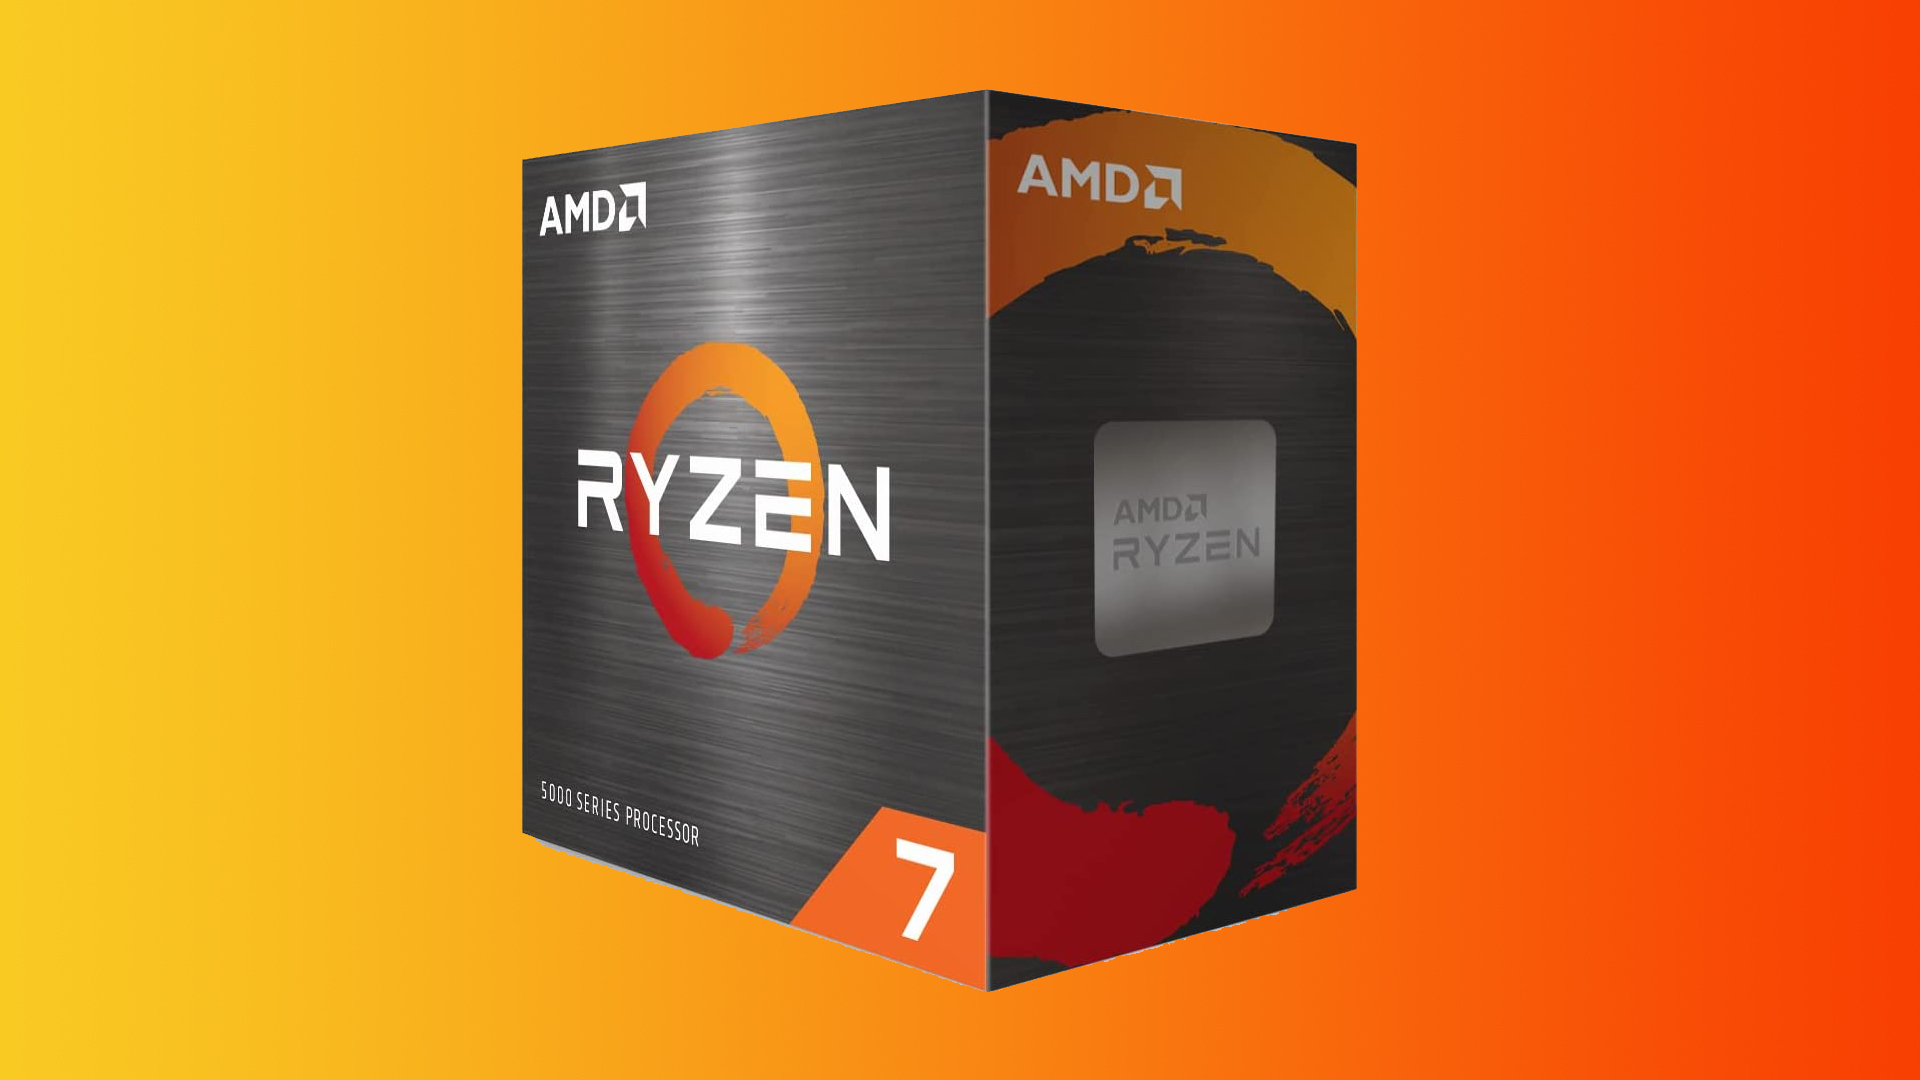 Newegg has a brilliant bundle deal going on AMD's cheapest 8 core CPU and some RAM going right now